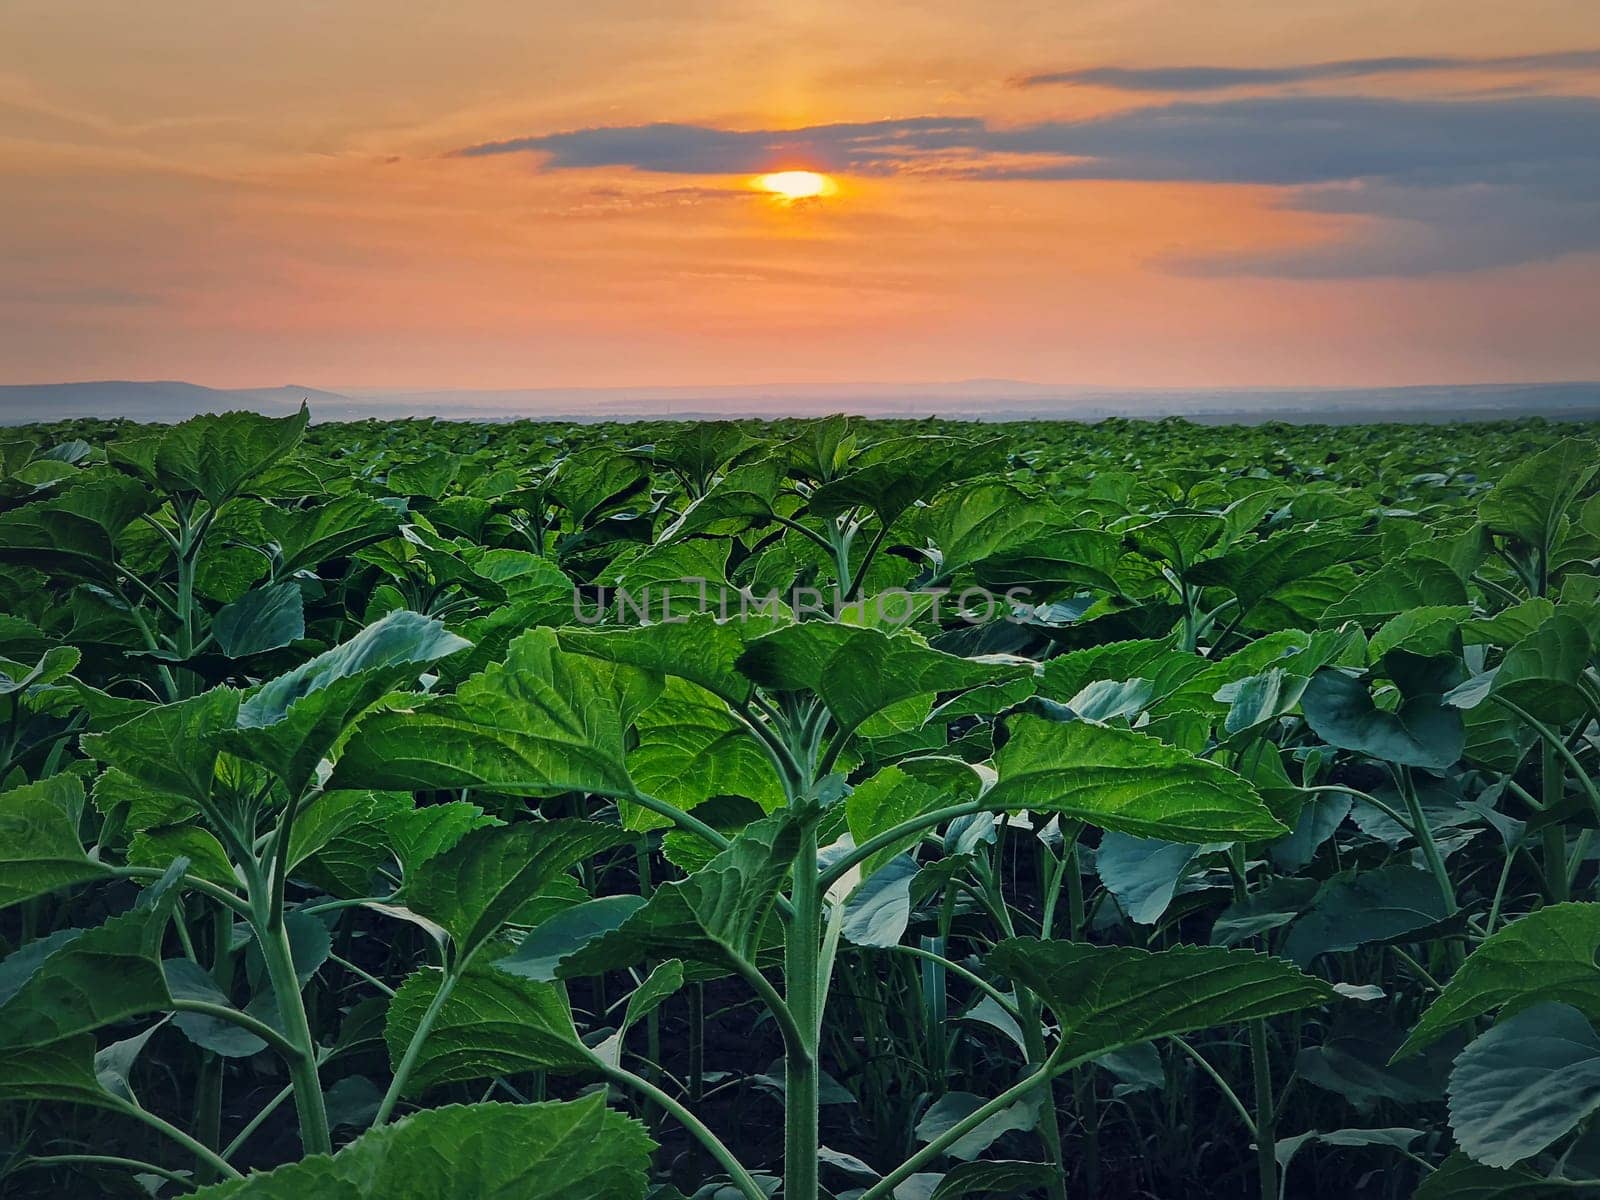 Growing sunflower plants in the field over sunset sky background by psychoshadow